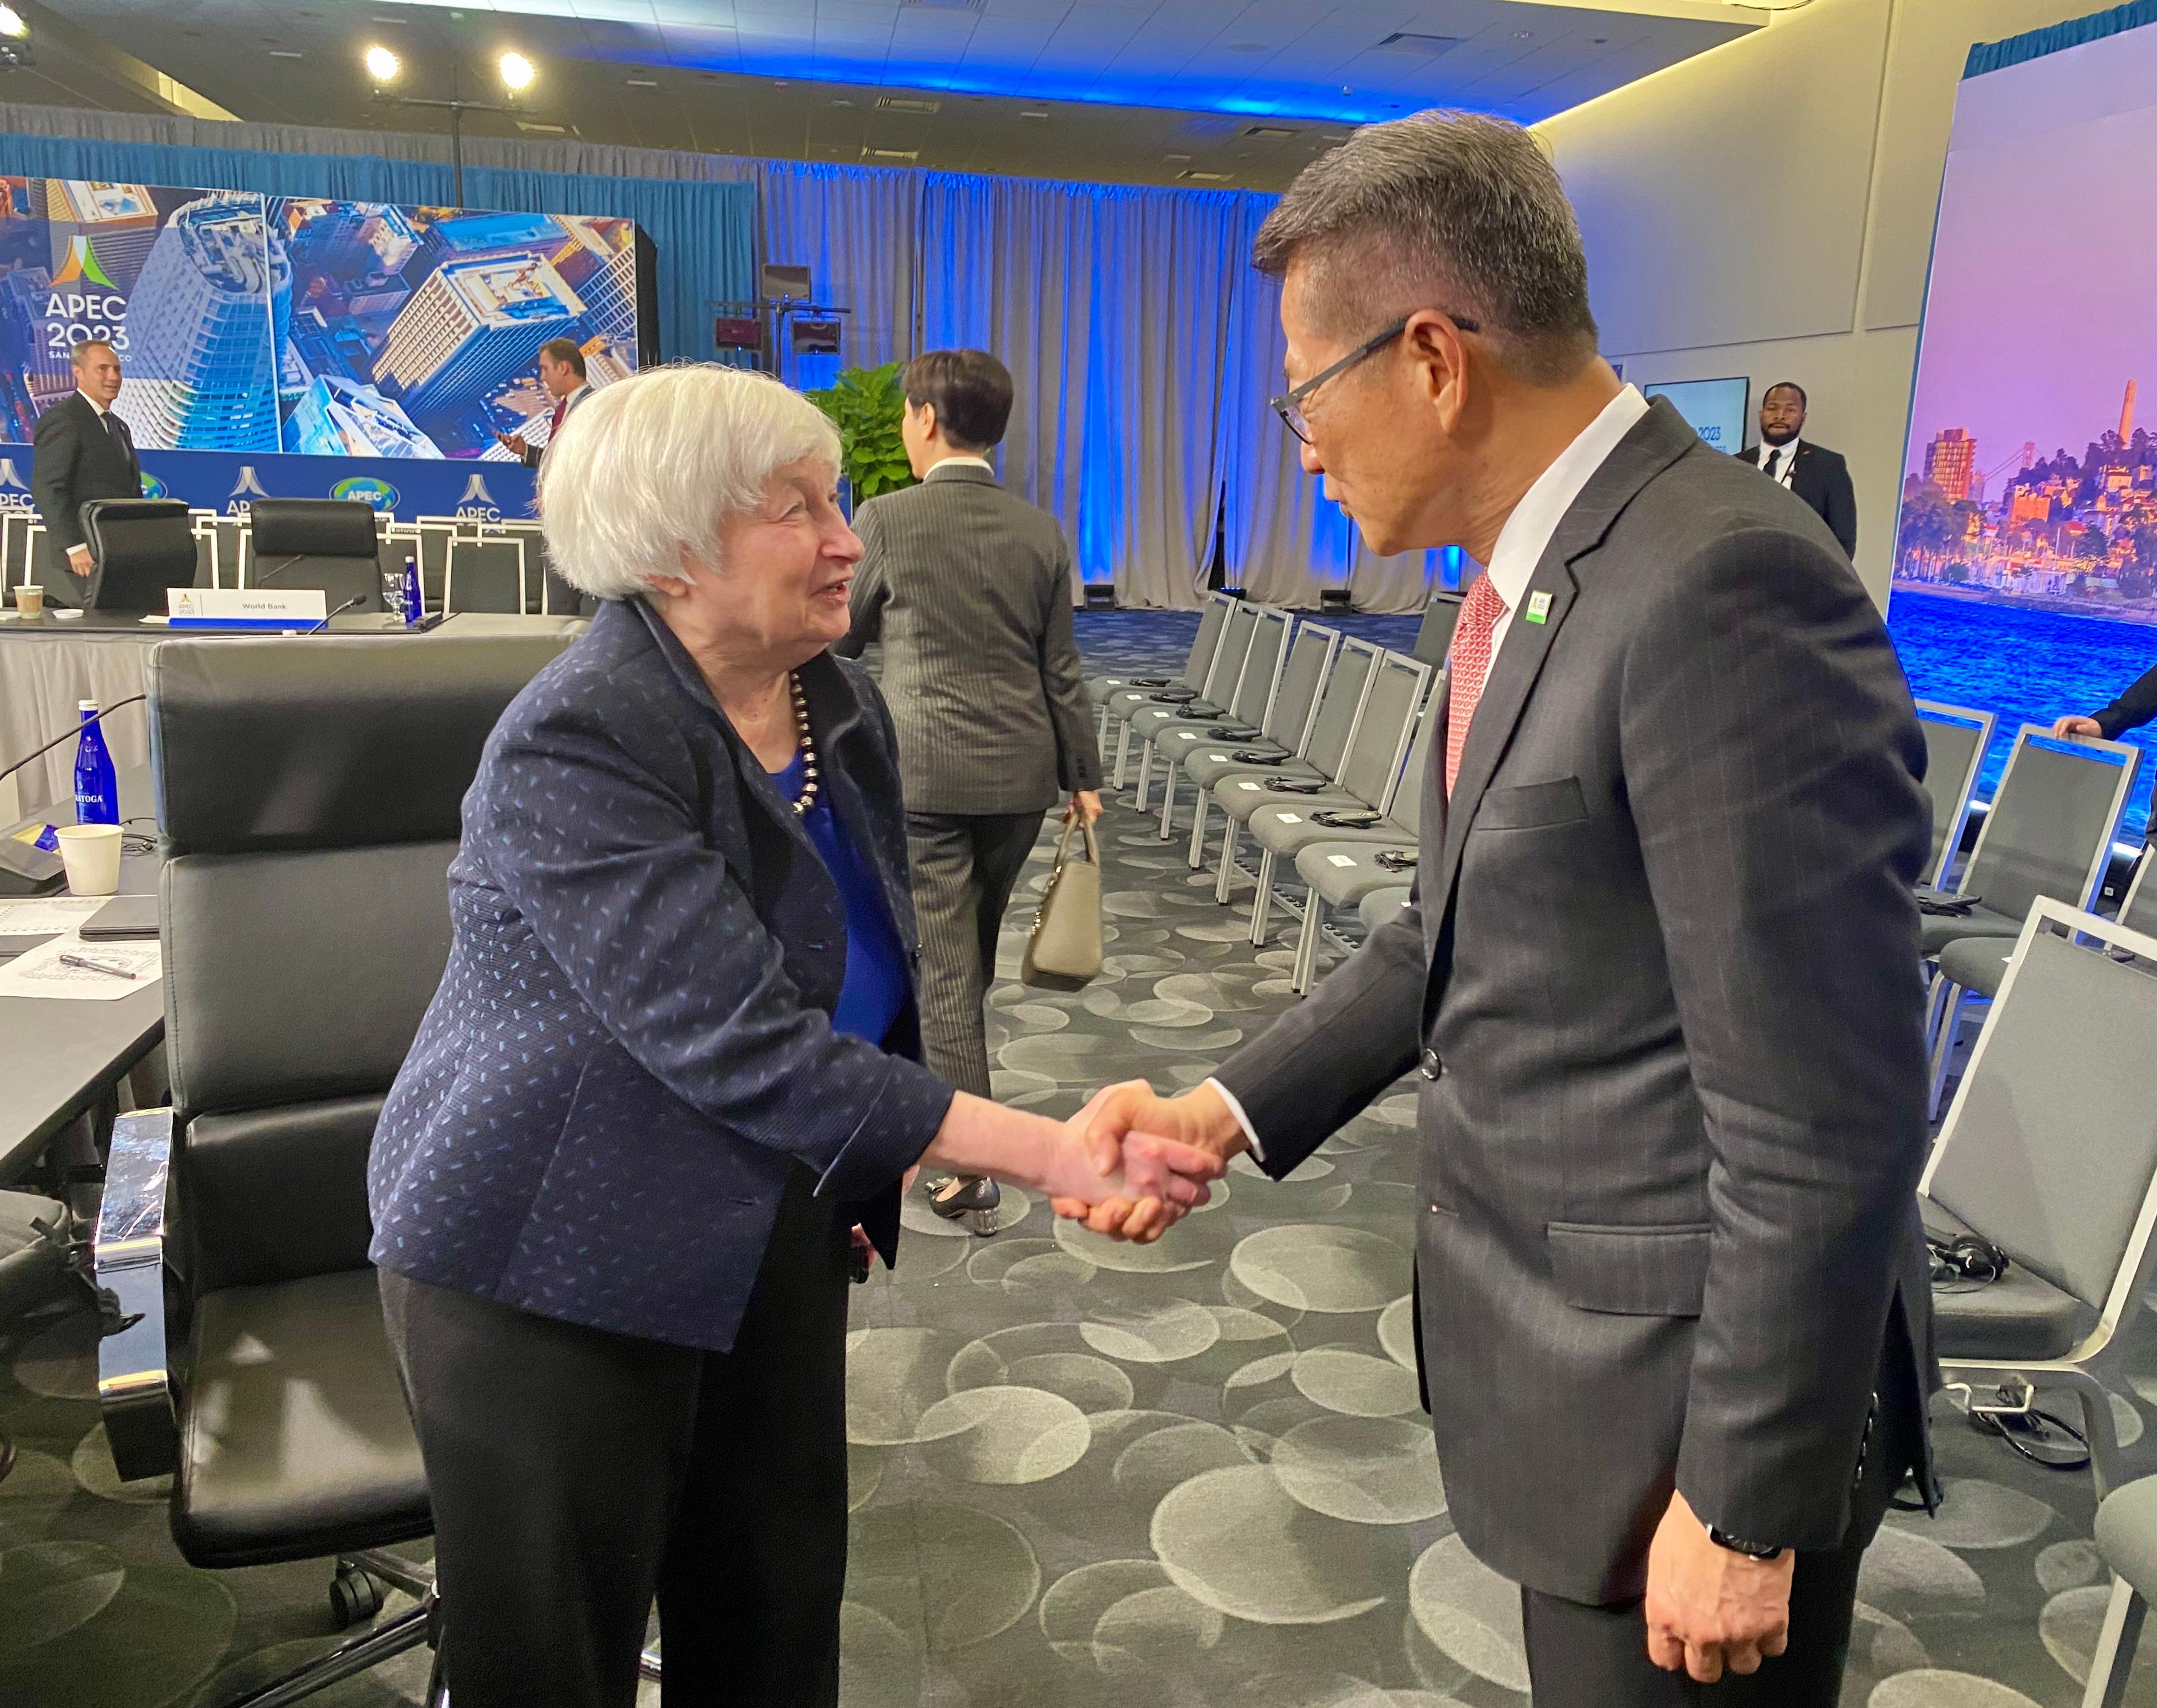 The Financial Secretary, Mr Paul Chan, yesterday (November 13, San Francisco time) attended the Asia-Pacific Economic Cooperation Finance Ministers' Meeting in San Francisco, the United States, where he joined various sessions to discuss different issues on the current global economy. Photo shows Mr Chan (right) engages in a conversation with the United States Secretary of the Treasury, Dr Janet Yellen (left) who chairs the meeting. 
